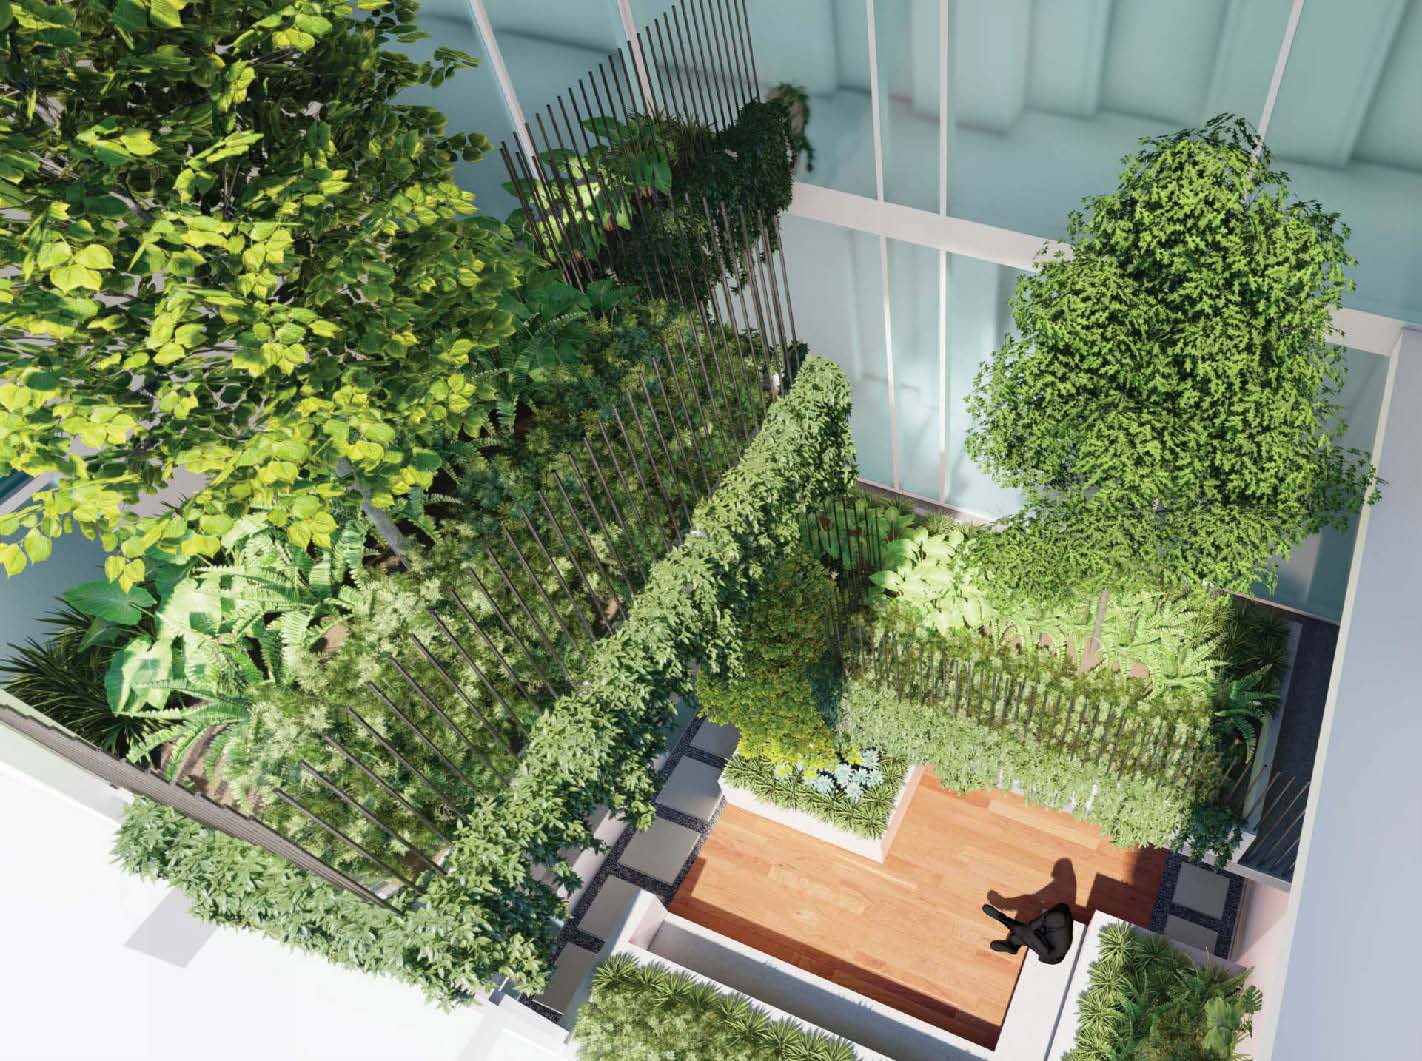 Artist's impression of typical courtyard planter